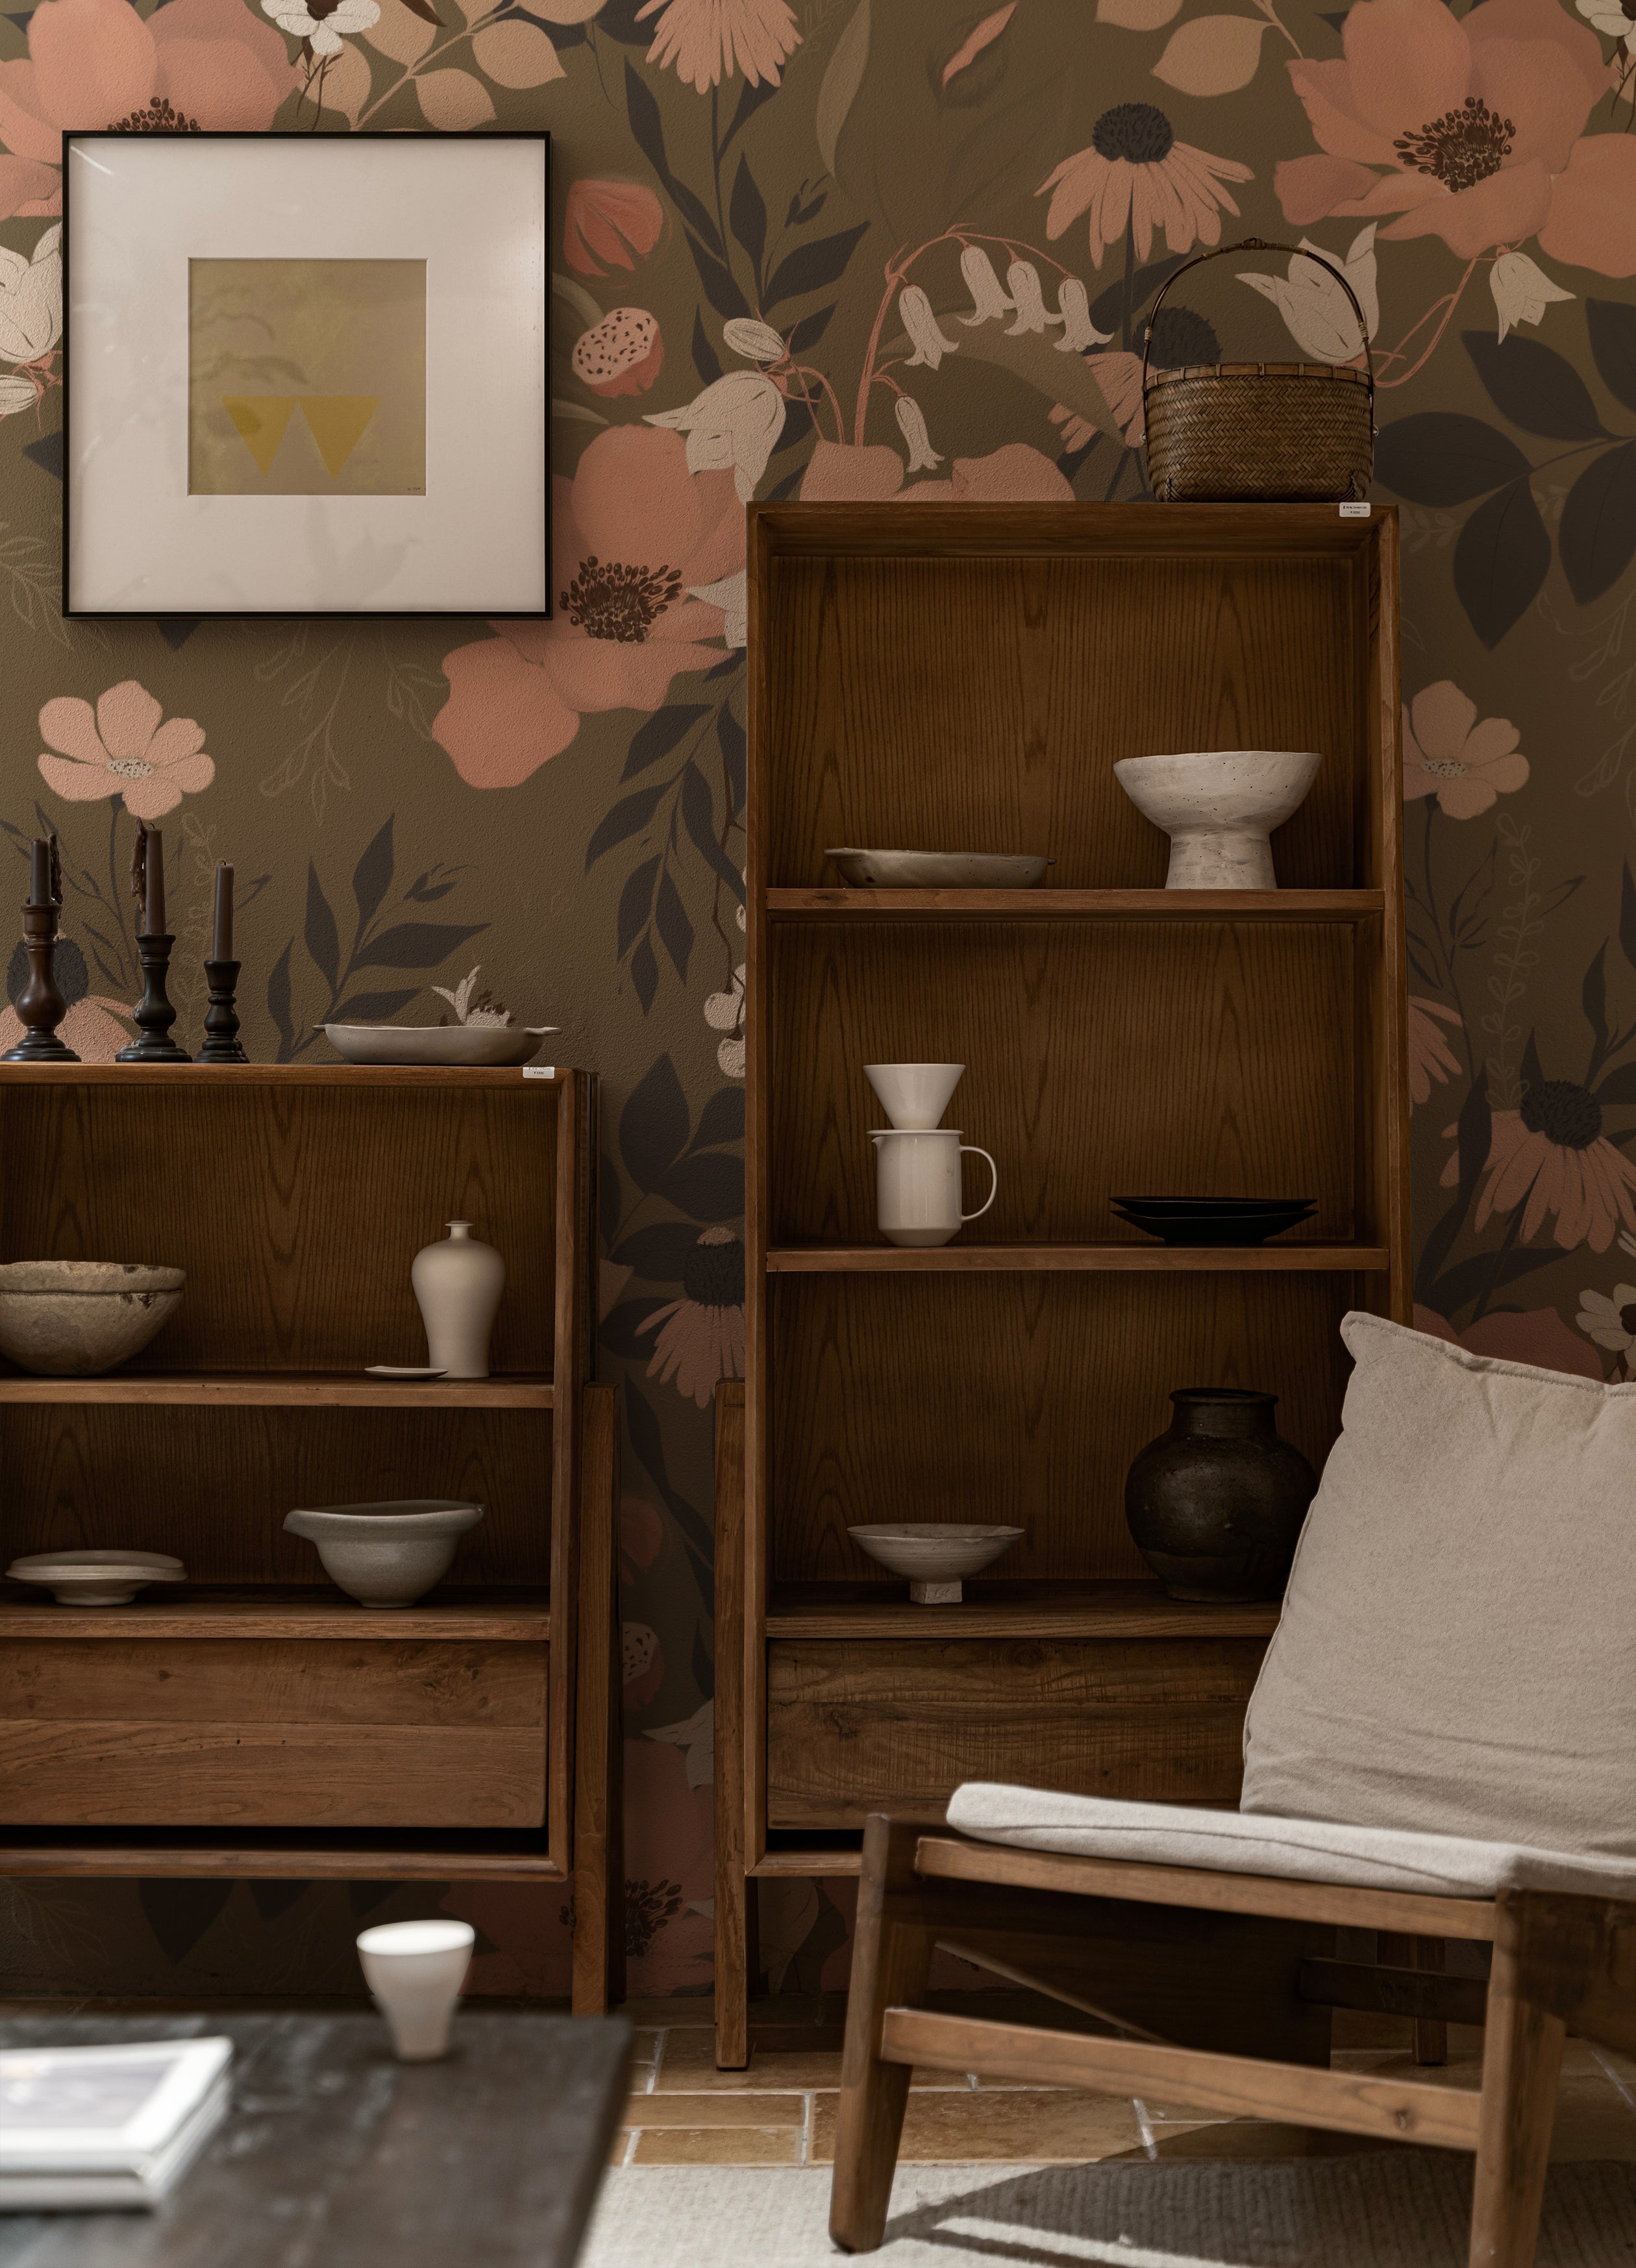 An interior scene featuring the Botanic Garden Wallpaper - 75" as a decorative backdrop in a cozy room setting. The wallpaper's large floral print in soft peach and muted green tones complements the wooden furniture and ceramic decor, enhancing the space's warm and inviting atmosphere.